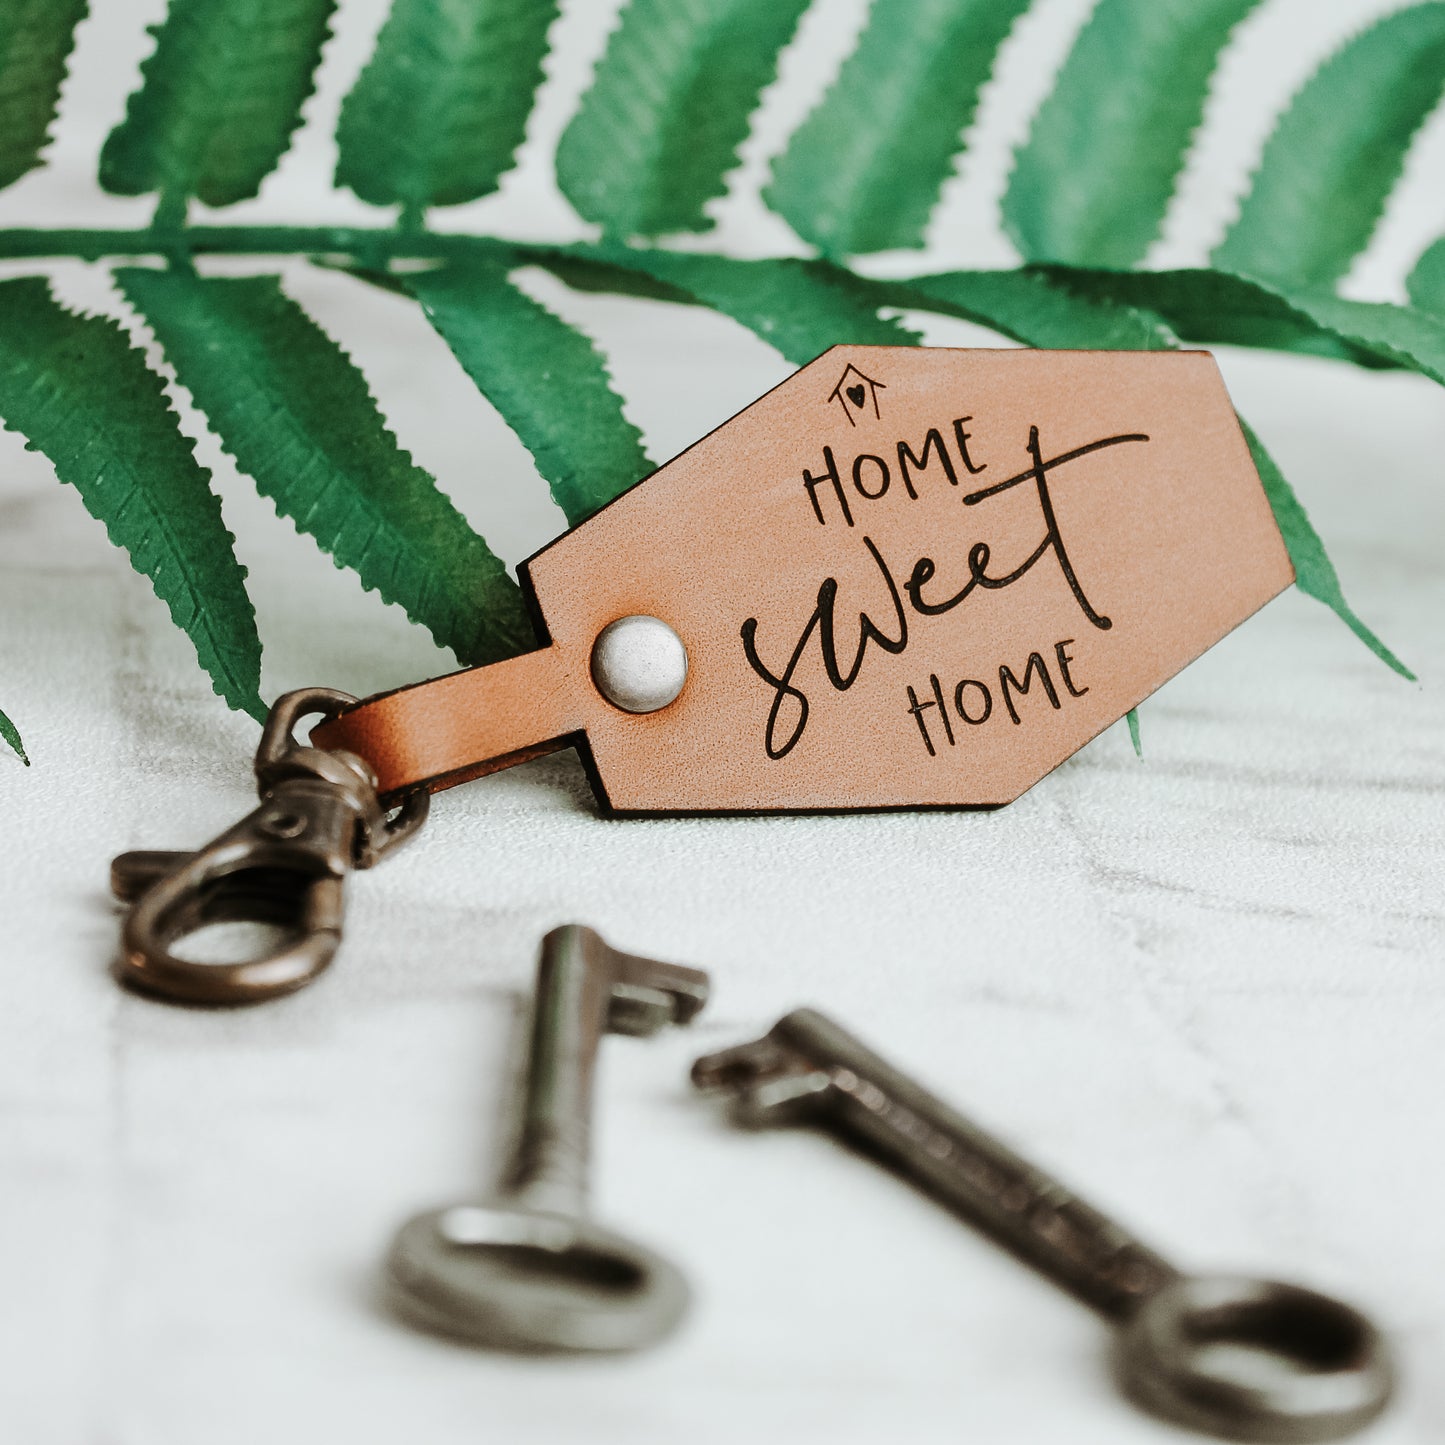 home sweet home keyring in a whisky colour with a swivel clasp, photographed on a fern leaf 